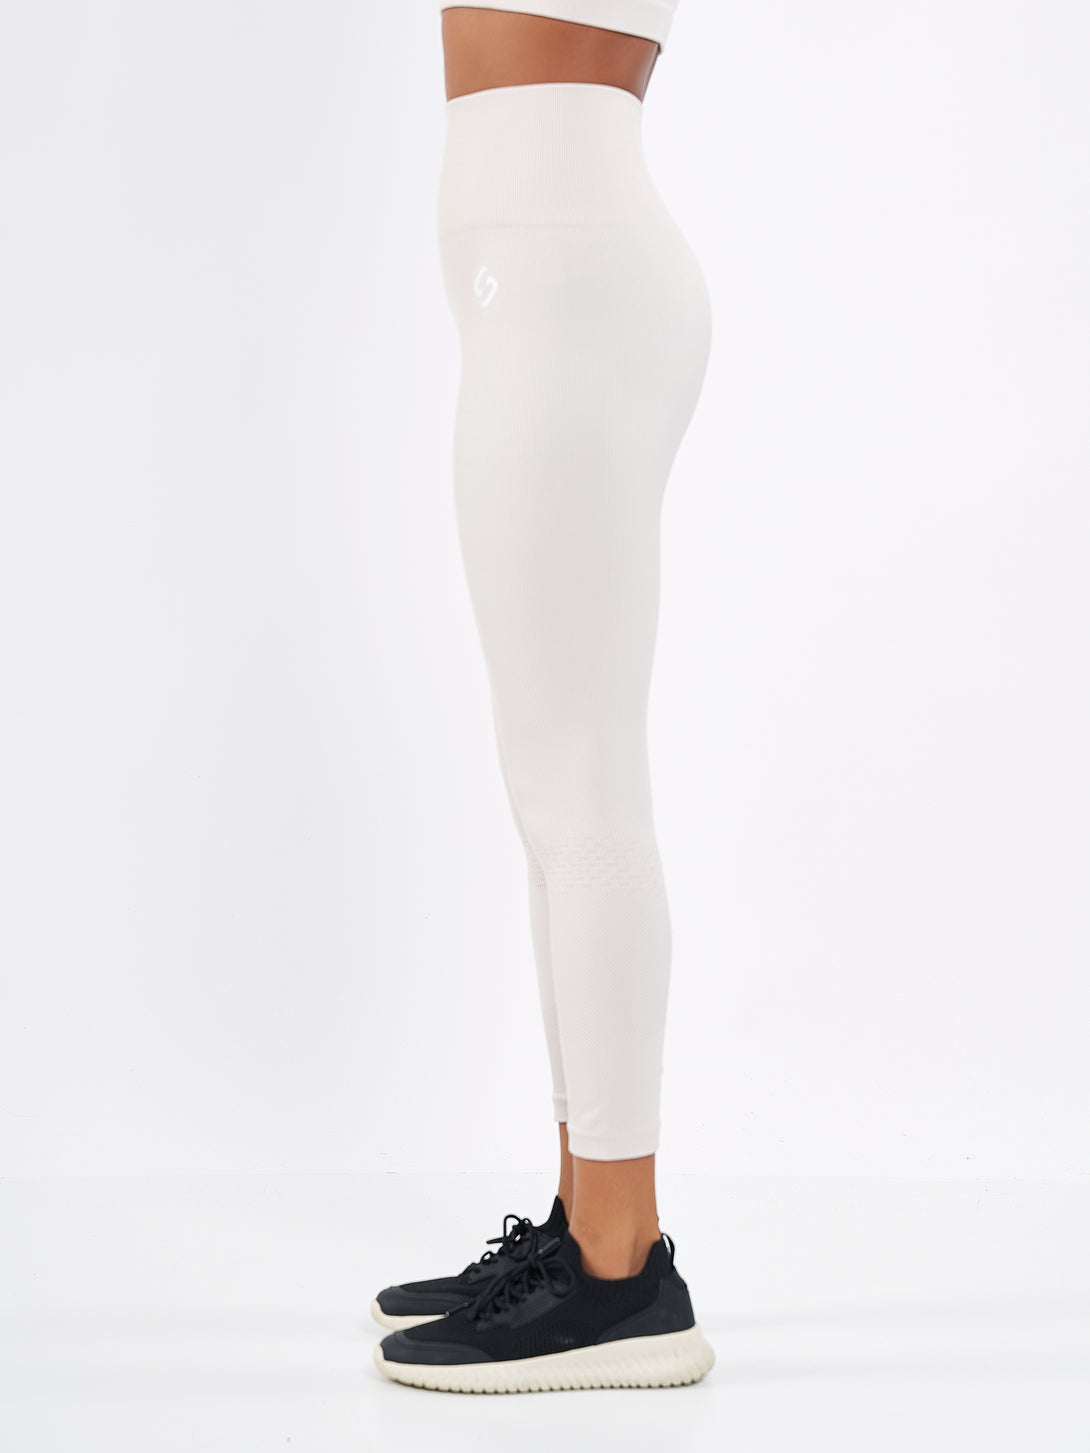 A Woman Wearing White Sand Color Seamless High-Waist Ankle-Length Ribbed Leggings. Super-Soft